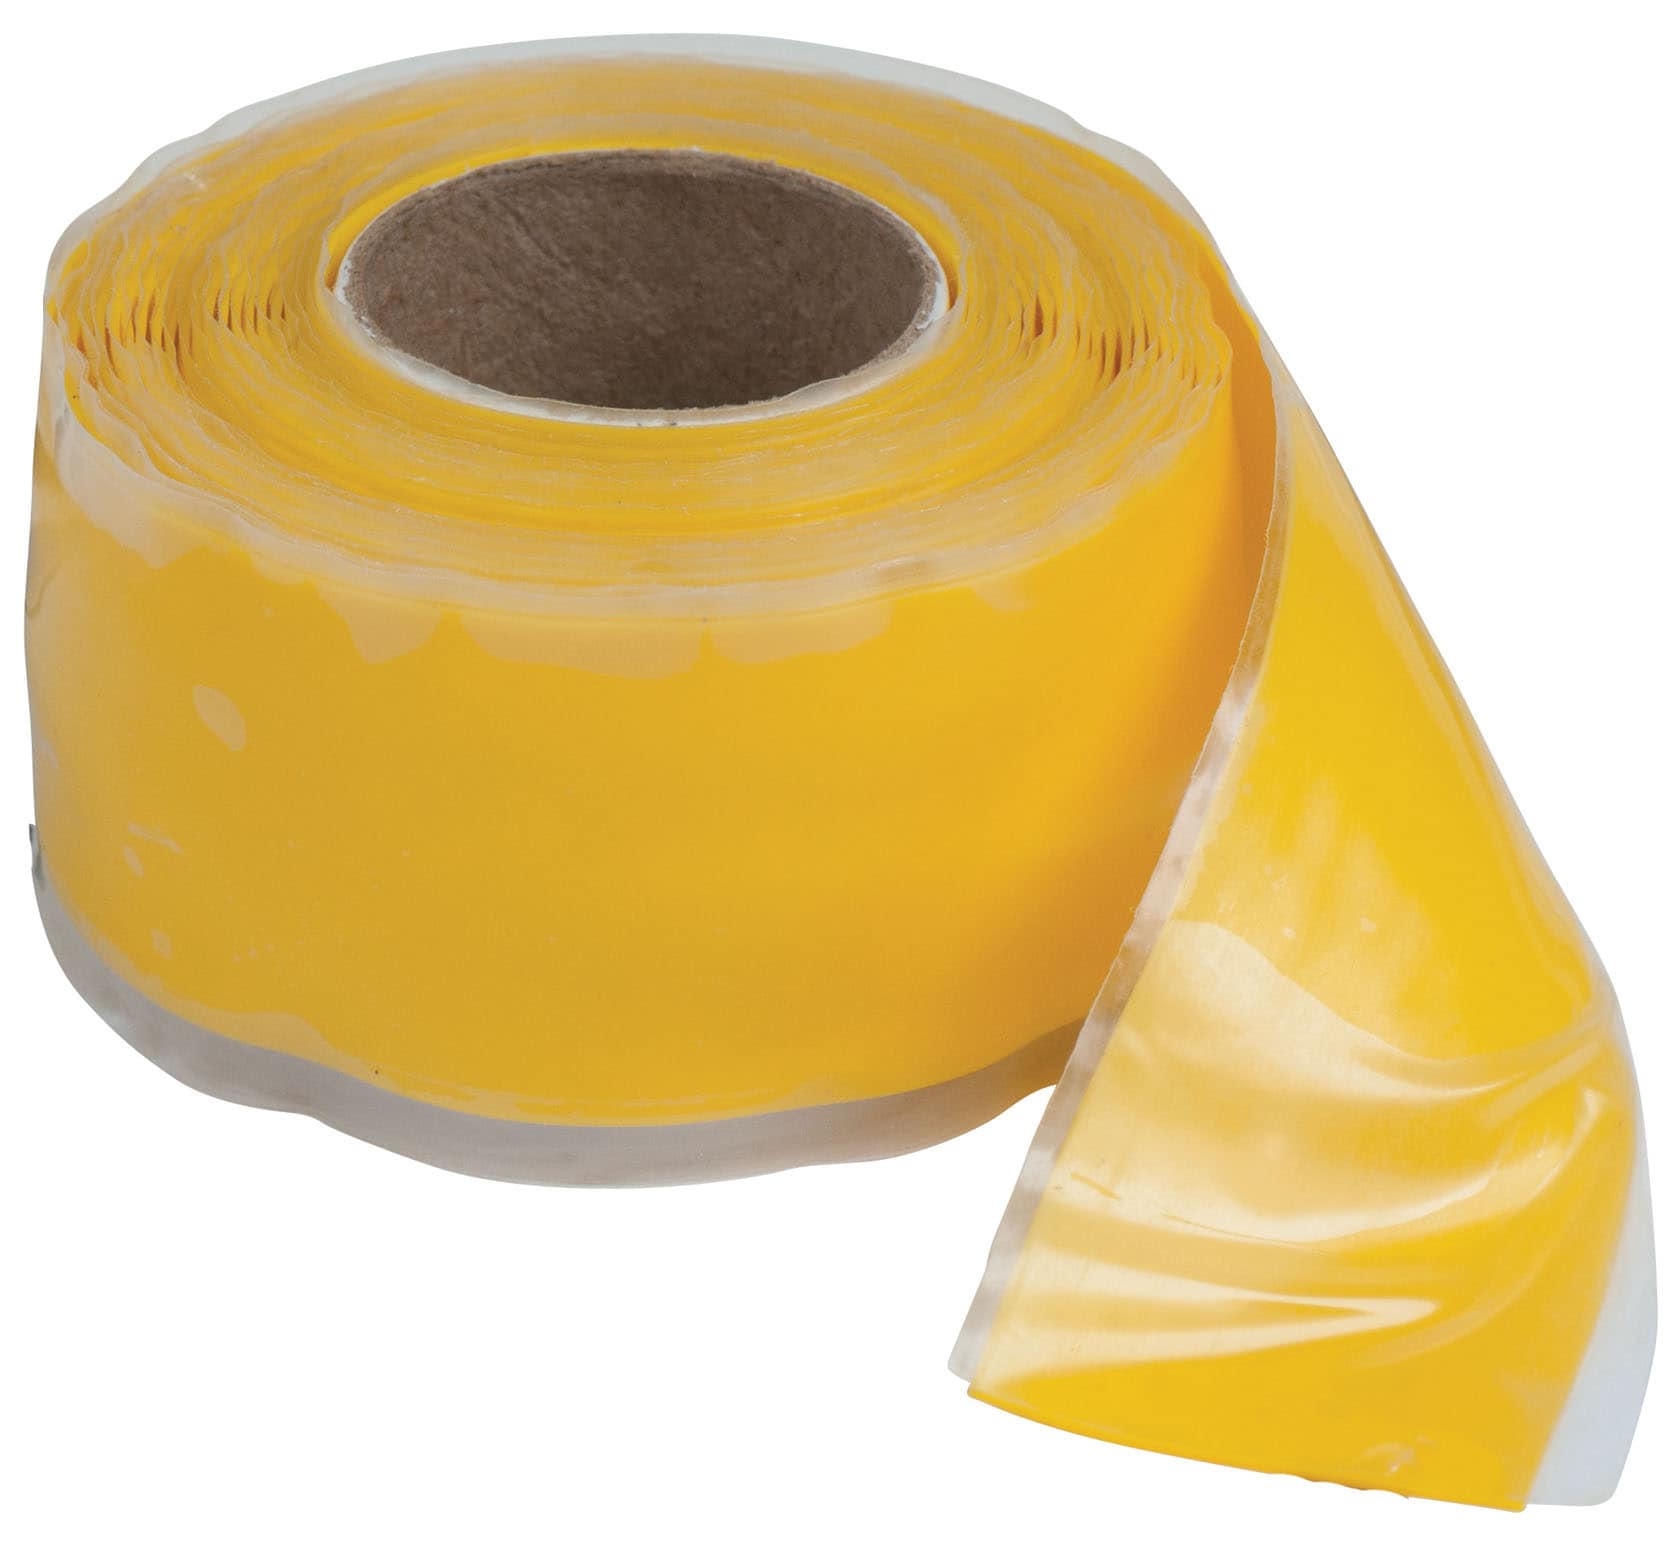 Utilitech 0.5-in x 20-ft Vinyl Electrical Tape Multiple Colors